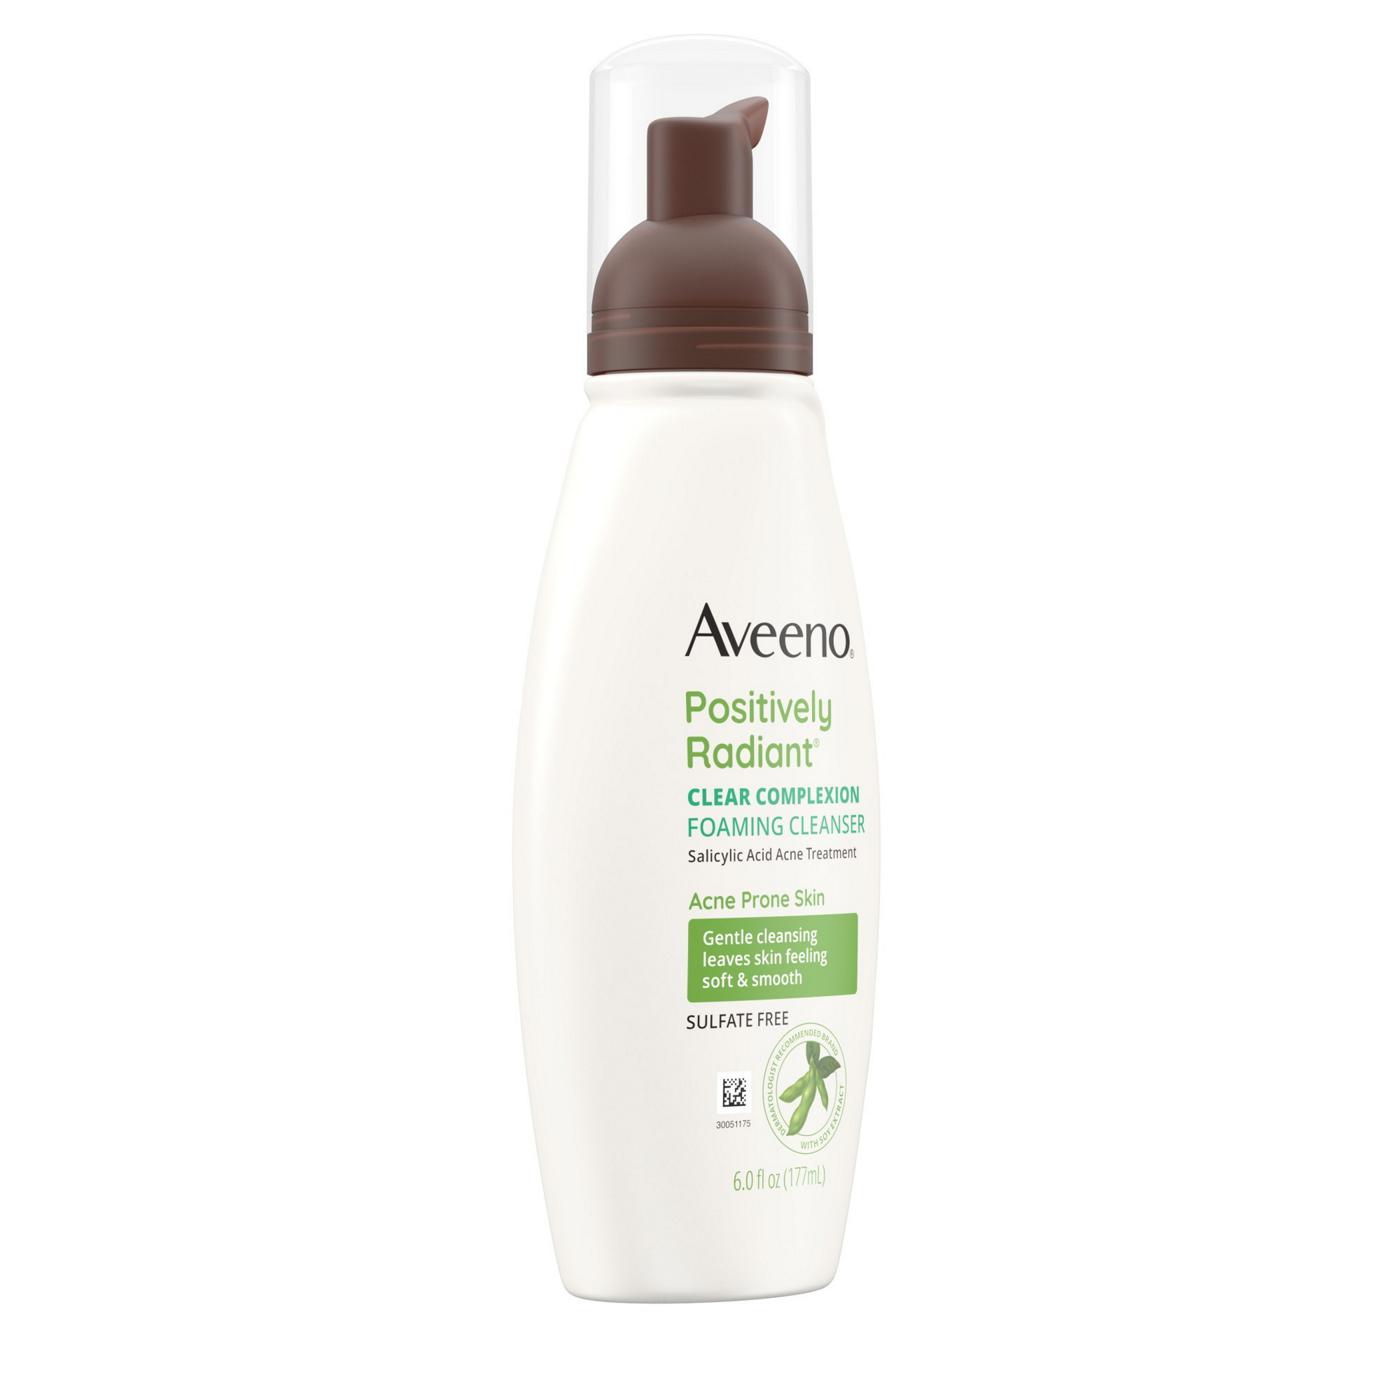 Aveeno Positively Radiant Clear Complexion Foaming Cleanser; image 4 of 6